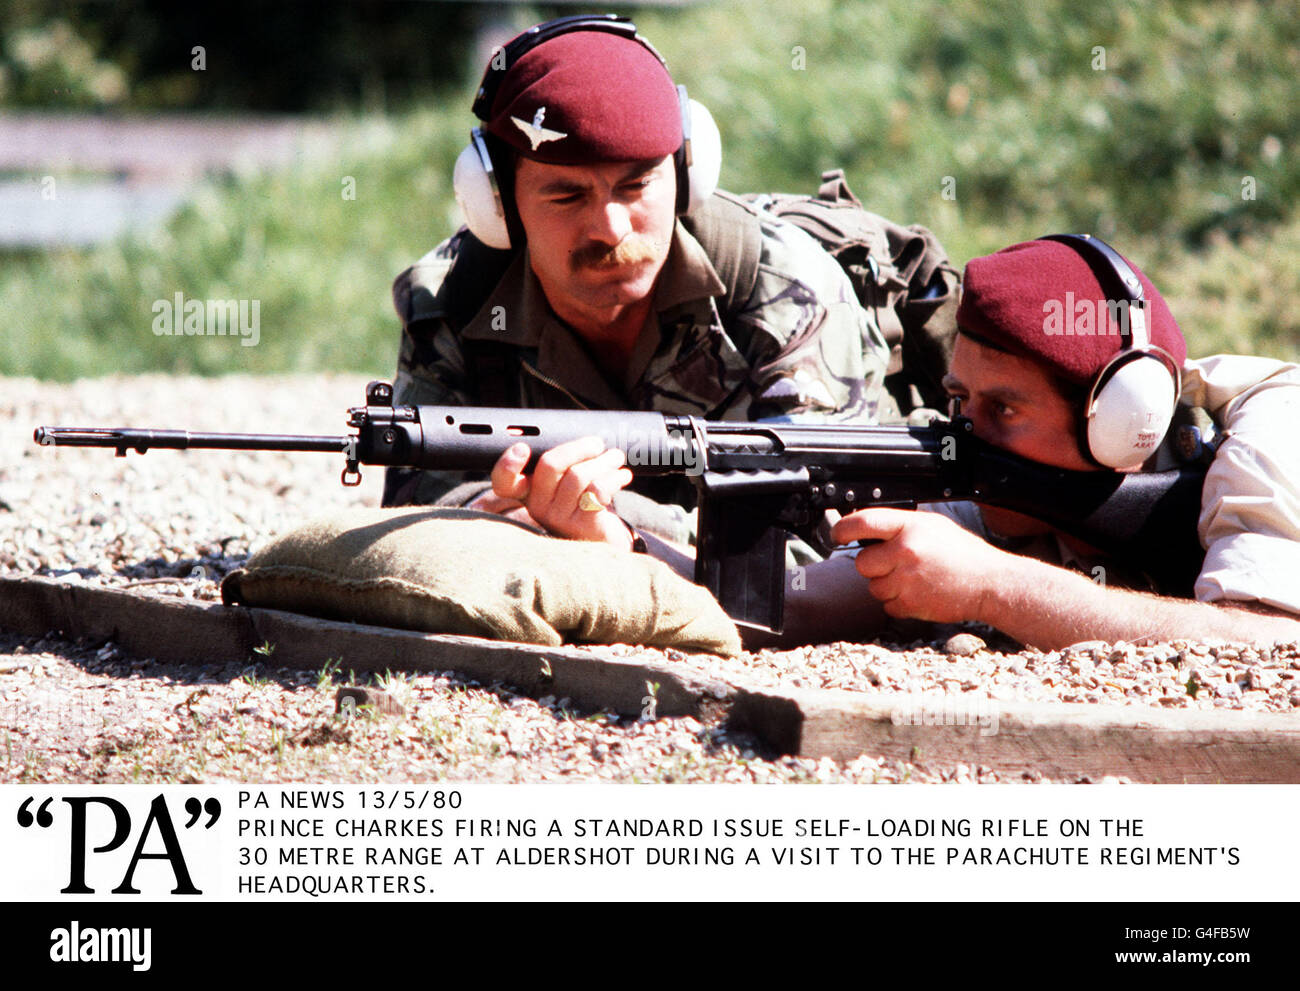 PA NEWS 13/5/80 PRINCE CHARKES FIRING A STANDARD ISSUE SELF-LOADING RIFLE ON THE 30 METRE RANGE AT ALDERSHOT DURING A VISIT TO THE PARACHUTE REGIMENT'S HEADQUARTERS. Stock Photo